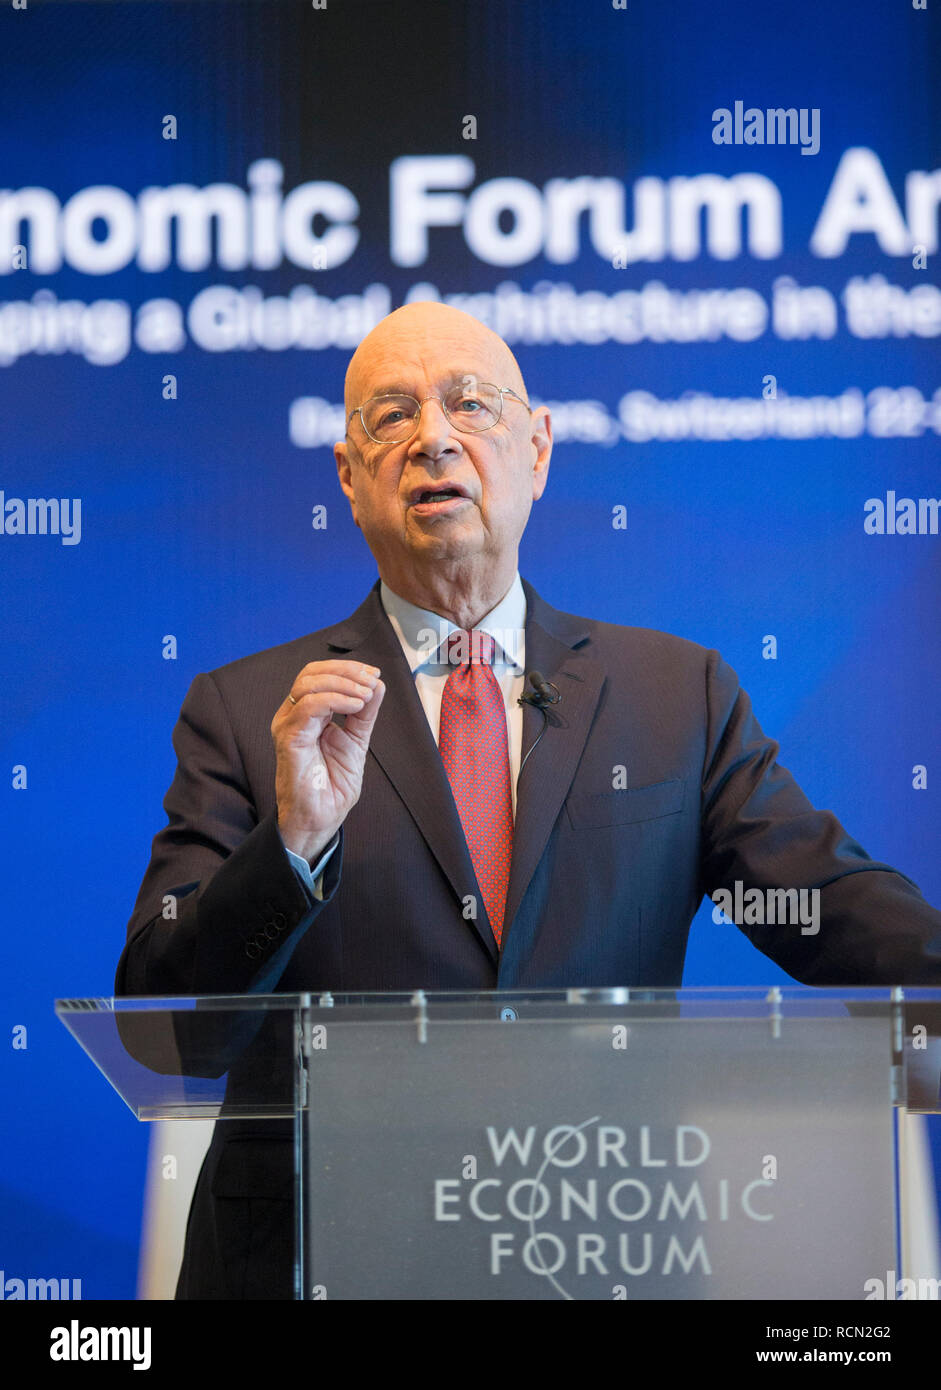 Geneva, Switzerland. 15th Jan, 2019. World Economic Forum (WEF) founder Klaus Schwab speaks at a press conference at the WEF headquarters in Geneva, Switzerland, Jan. 15, 2019. The world is entering a period of 'profound instability' due to the technological disruption of the Fourth Industrial Revolution and geo-economic and geopolitical realignment, Klaus Schwab said Tuesday. The forum's 2019 annual meeting will take place in Davos-Klosters, Switzerland from Jan. 22 to 25. Credit: Xu Jinquan/Xinhua/Alamy Live News Stock Photo